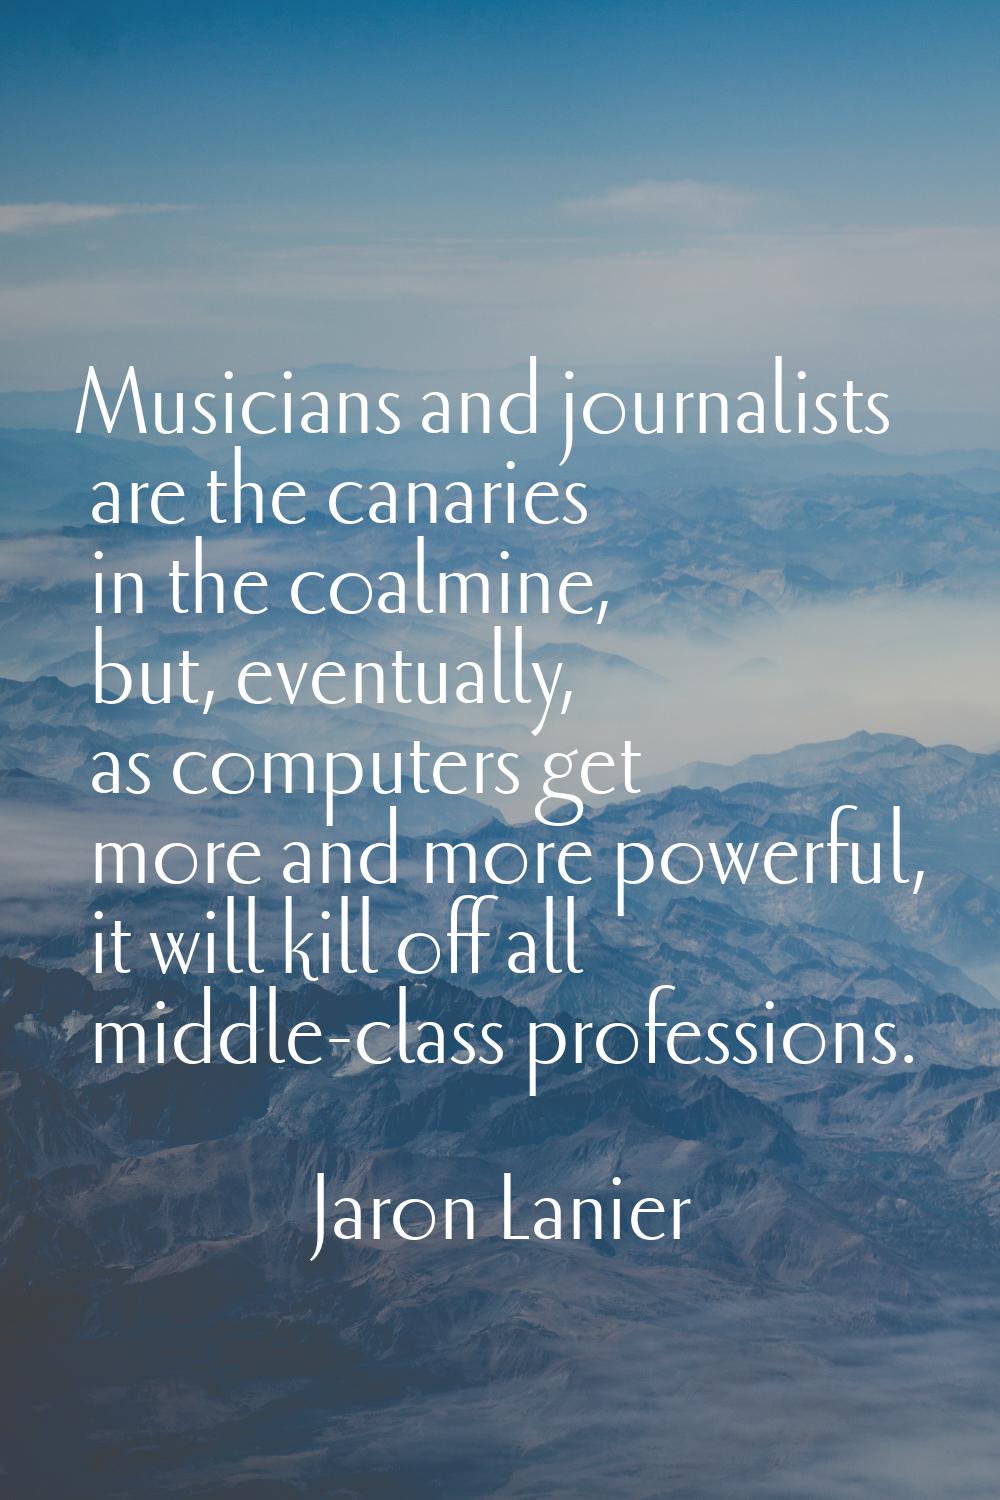 Musicians and journalists are the canaries in the coalmine, but, eventually, as computers get more 